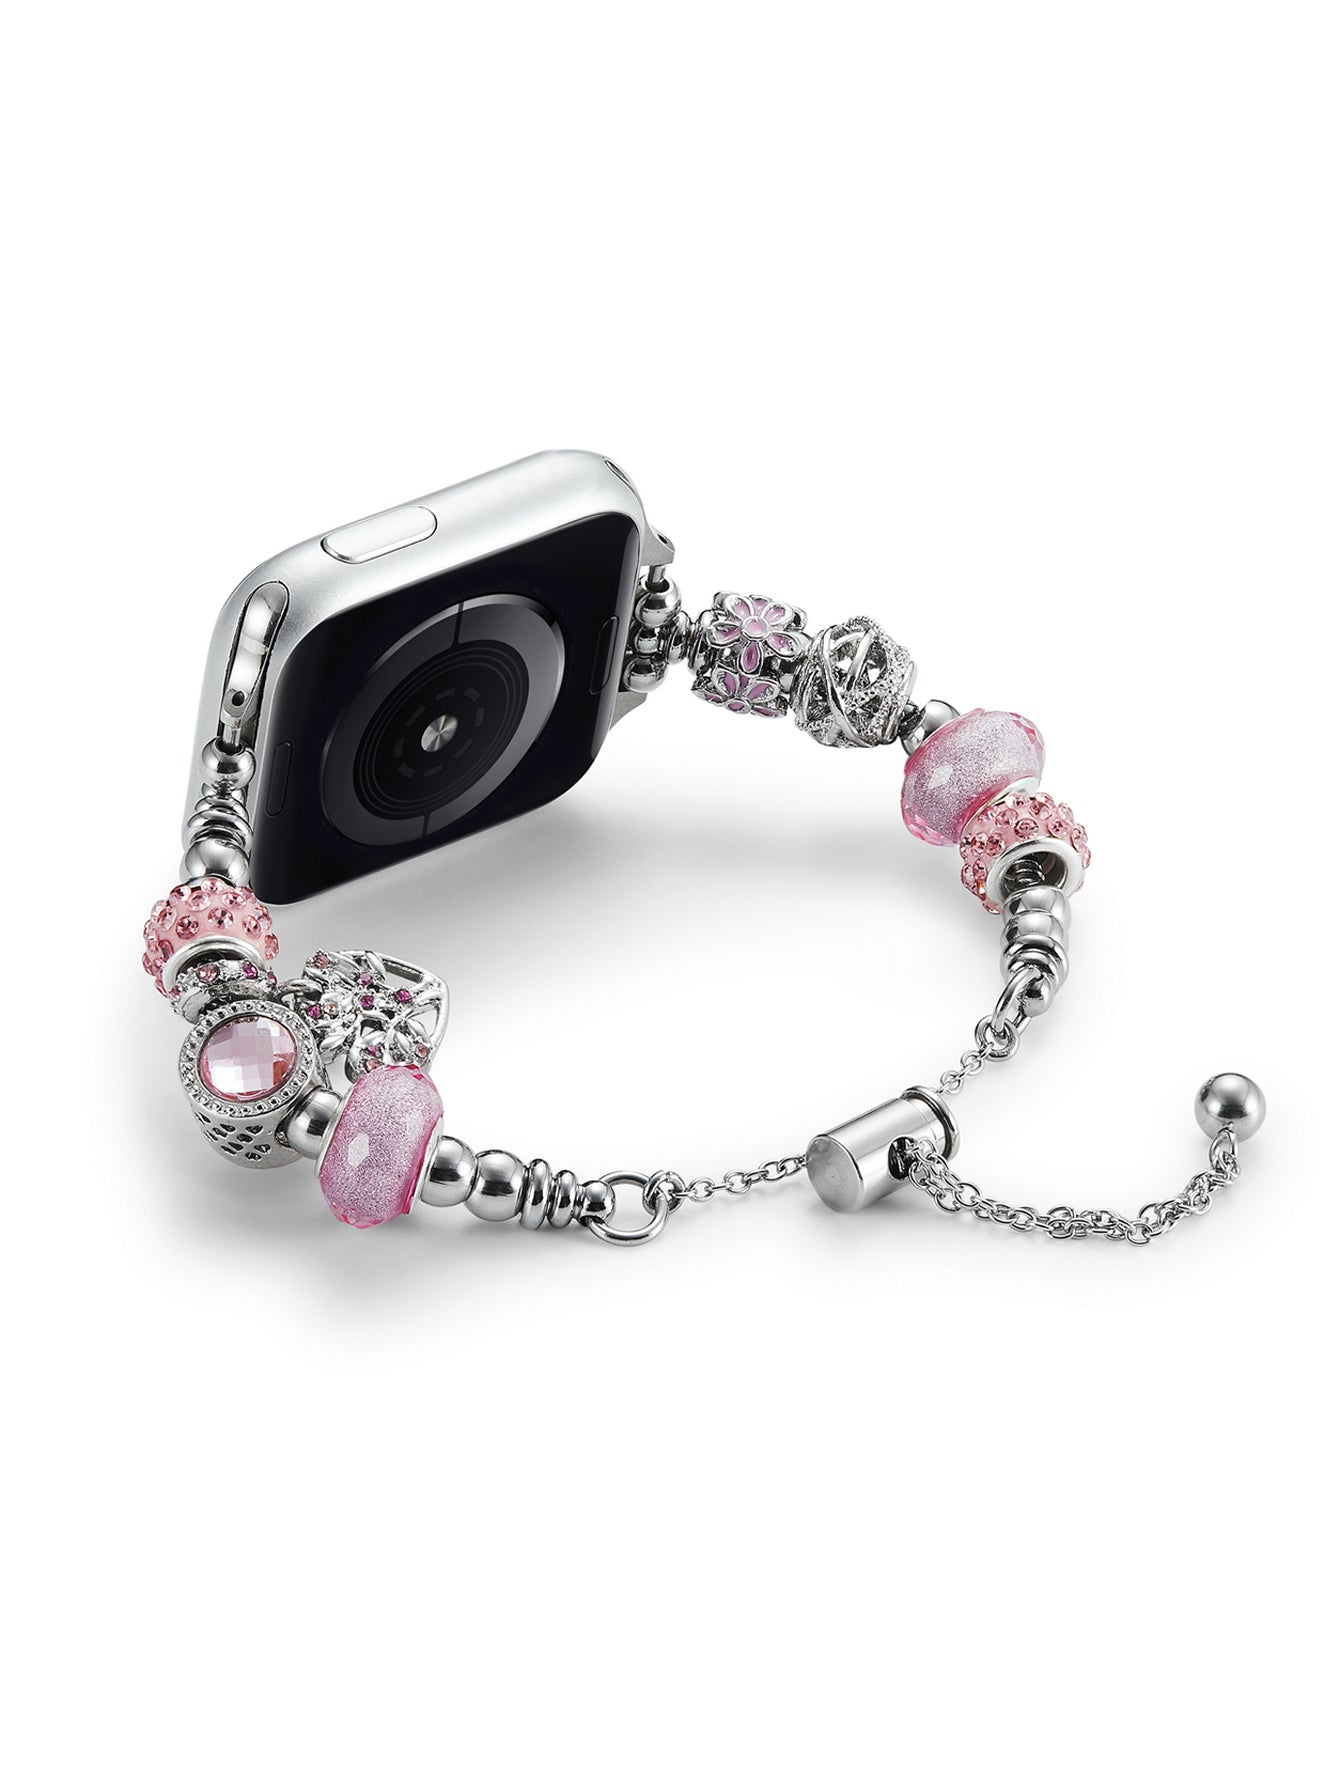 Luxury Beads Charm Bracelet Apple Watch Bands for iWatch All Series